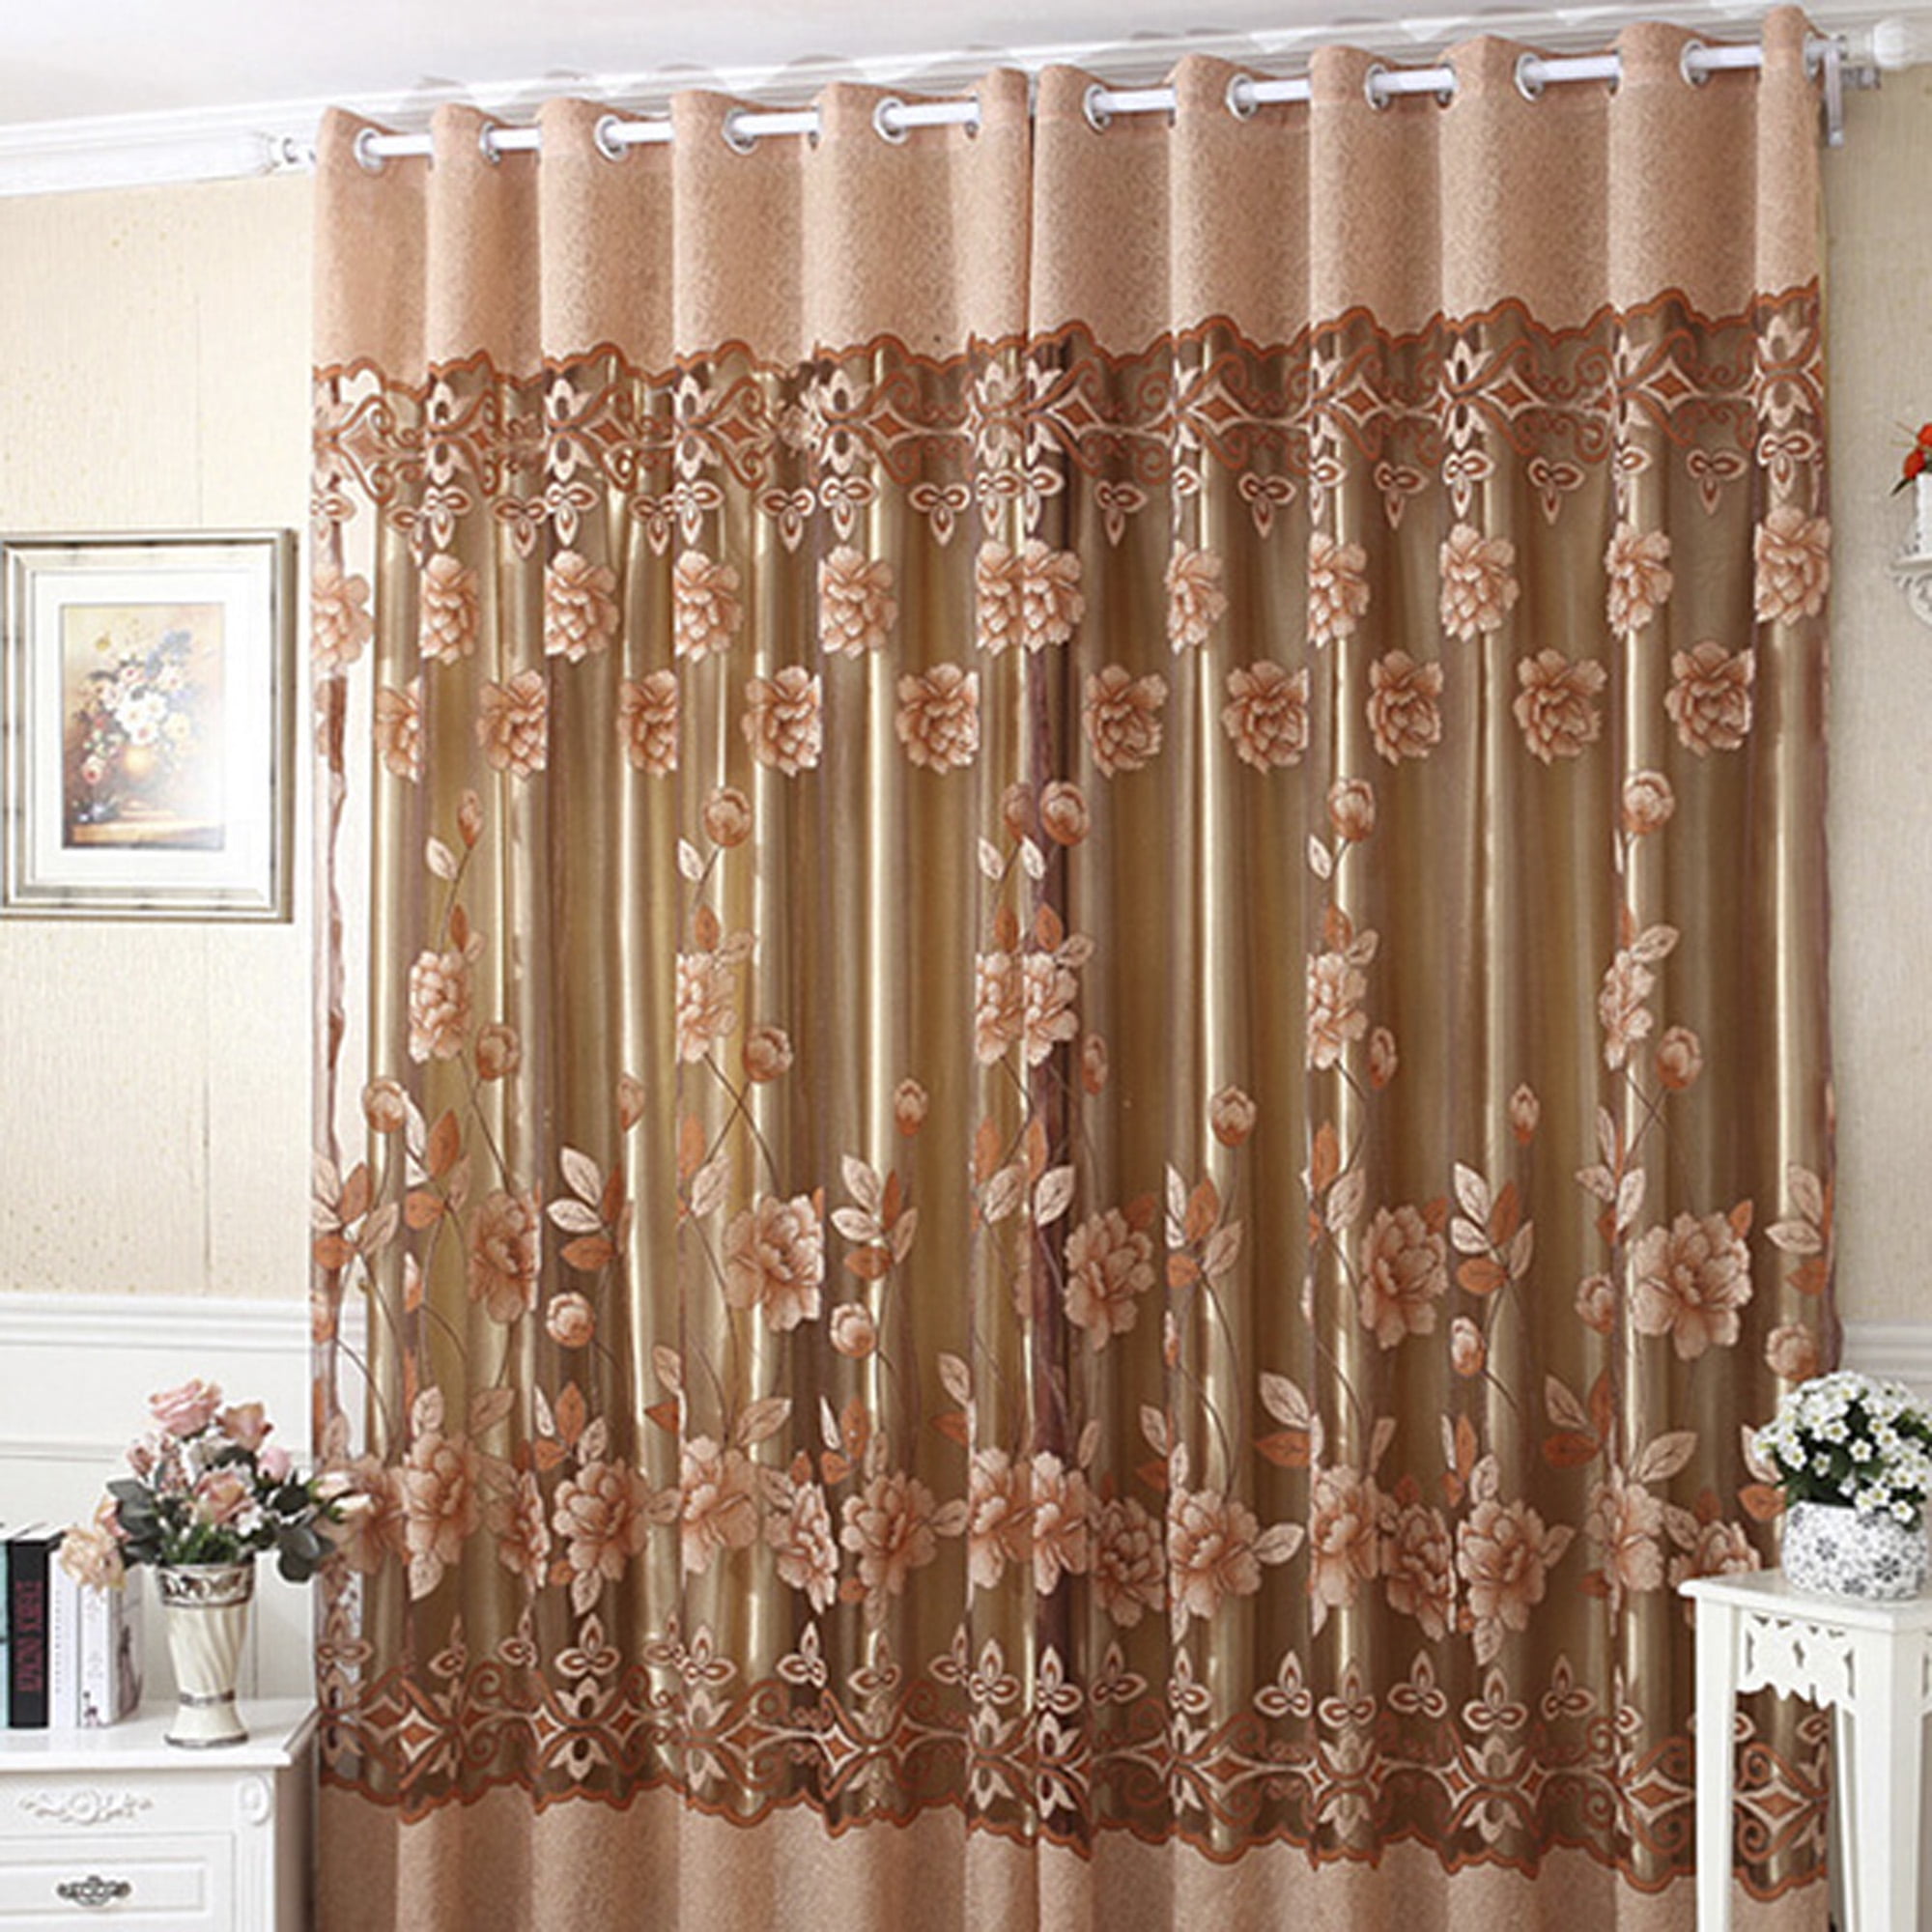 drawstring 1 piece W x H 100 x 100 cm sand SCHOAL Net curtains kitchen bistro curtains voile transparent short curtains small window curtains with ruffle tape 